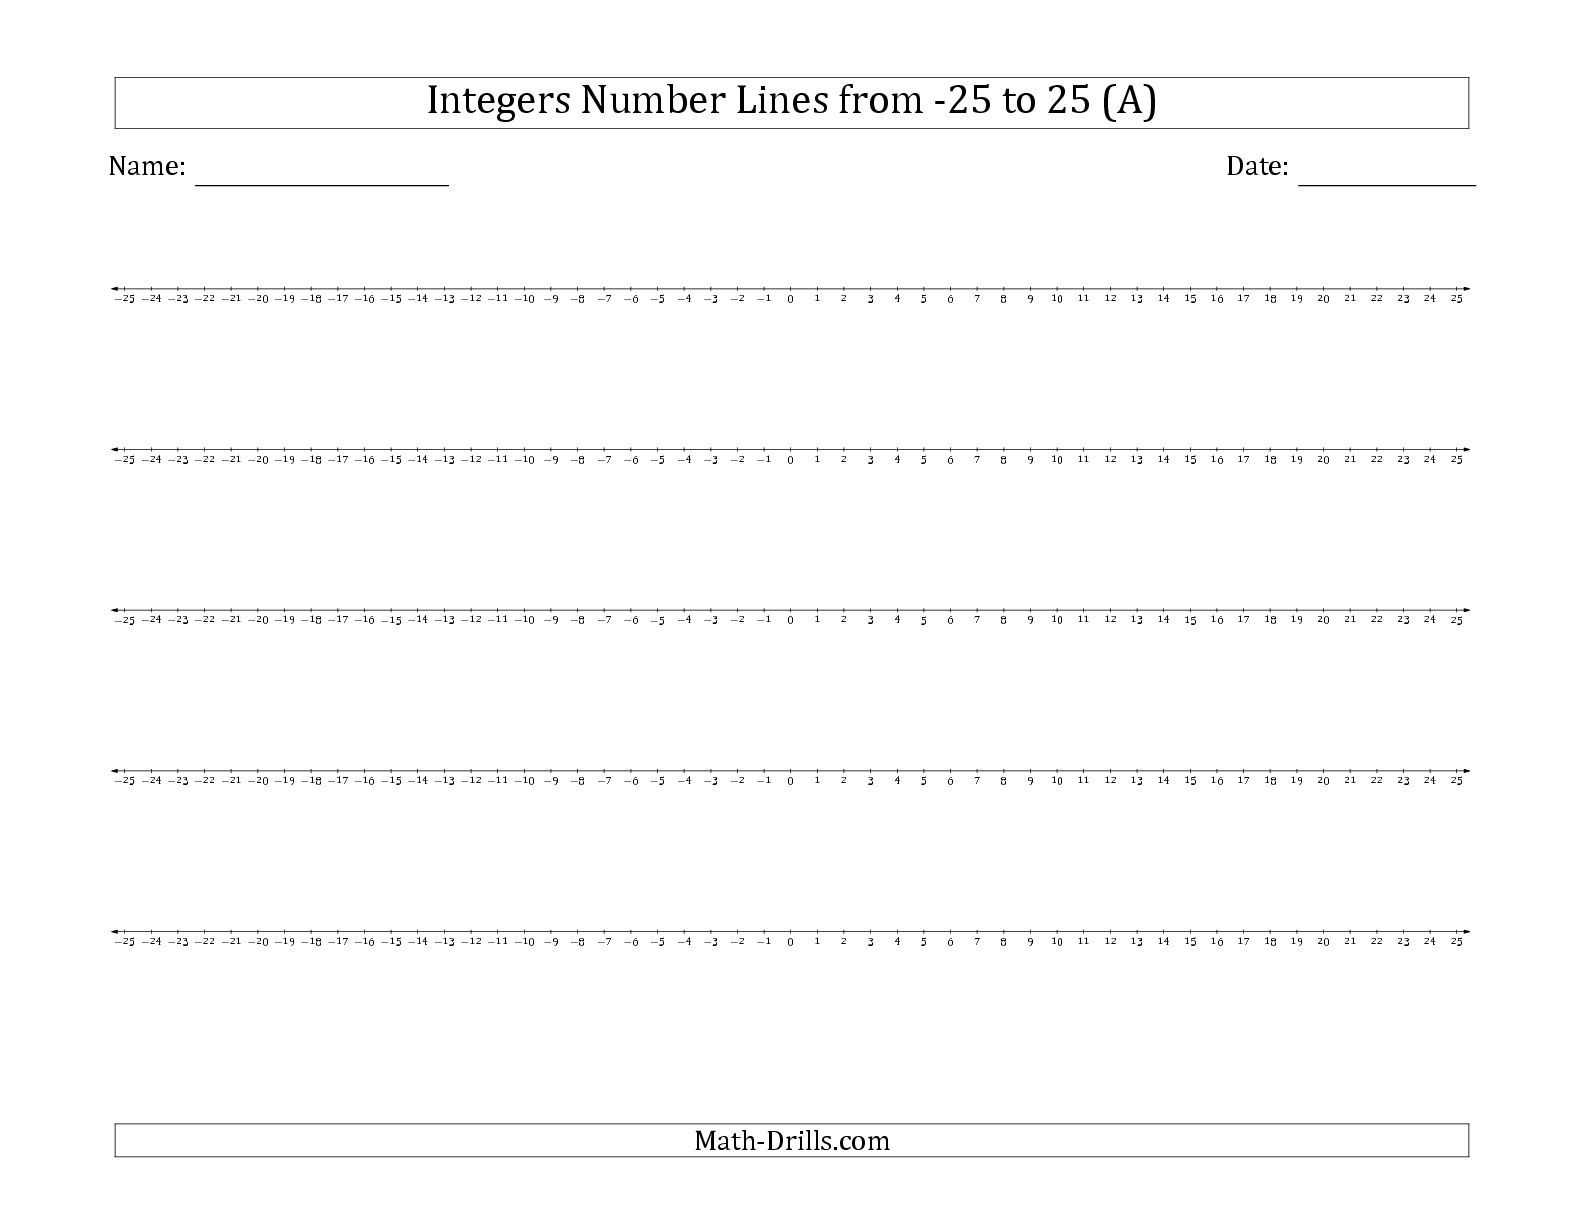 Facts About Birds Worksheet Also the Integers Number Lines From 25 to 25 Math Worksheet From the